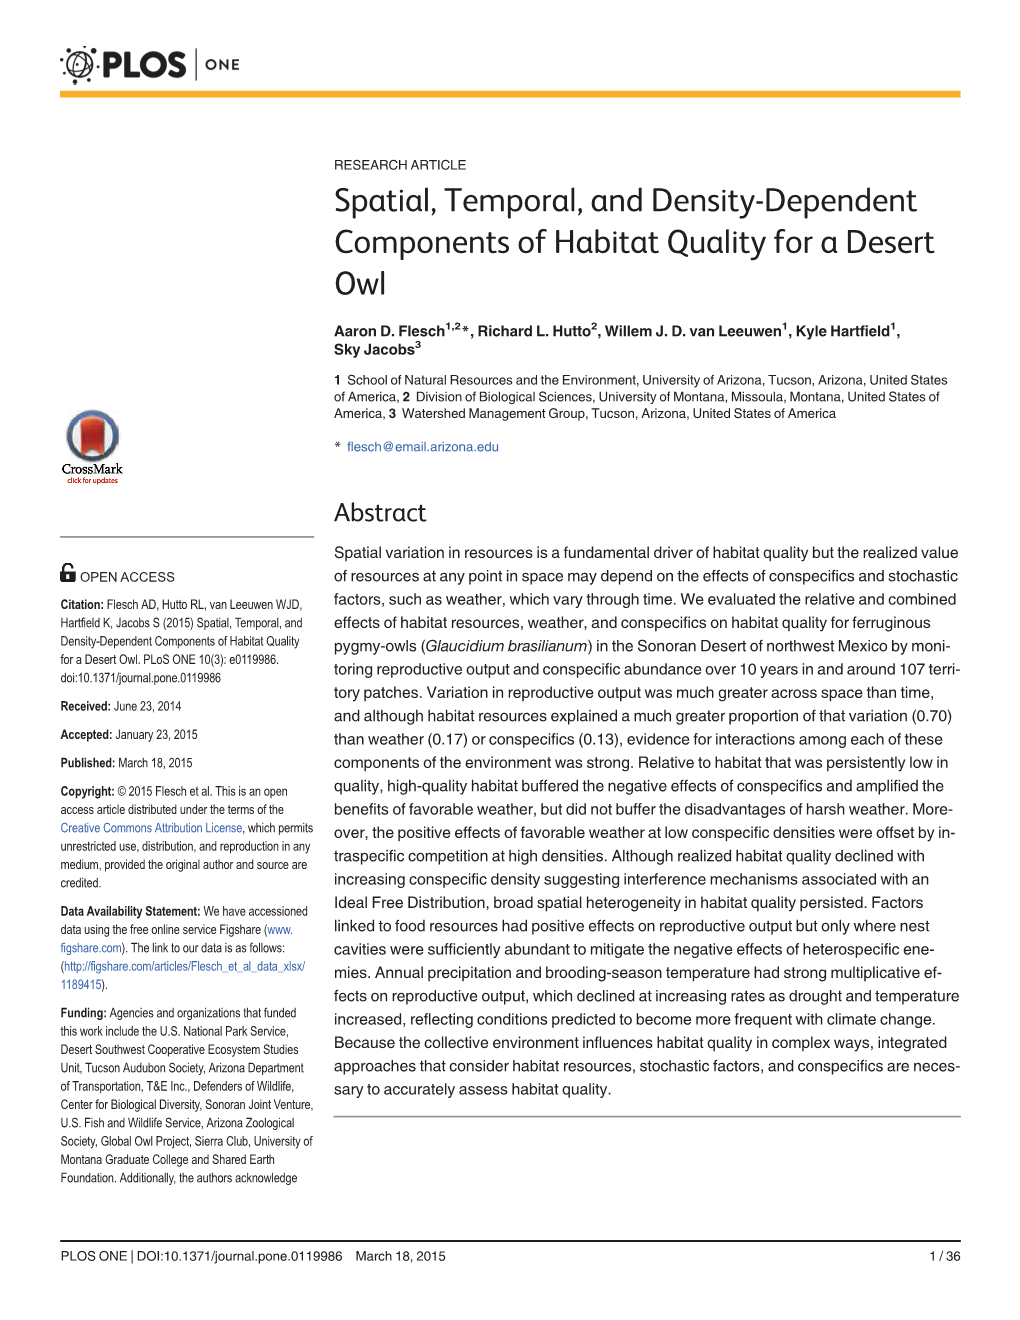 Spatial, Temporal, and Density-Dependent Components of Habitat Quality for a Desert Owl